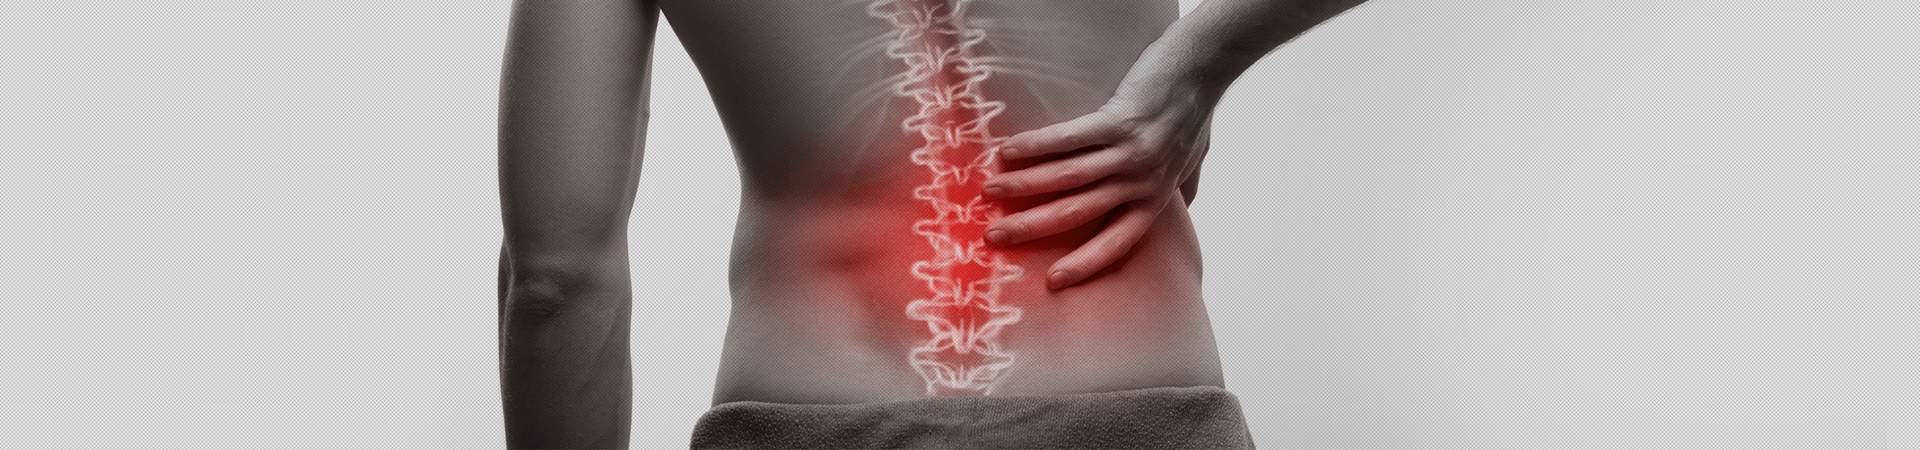 Physical Therapy For Back Injury: Back Pain Relief